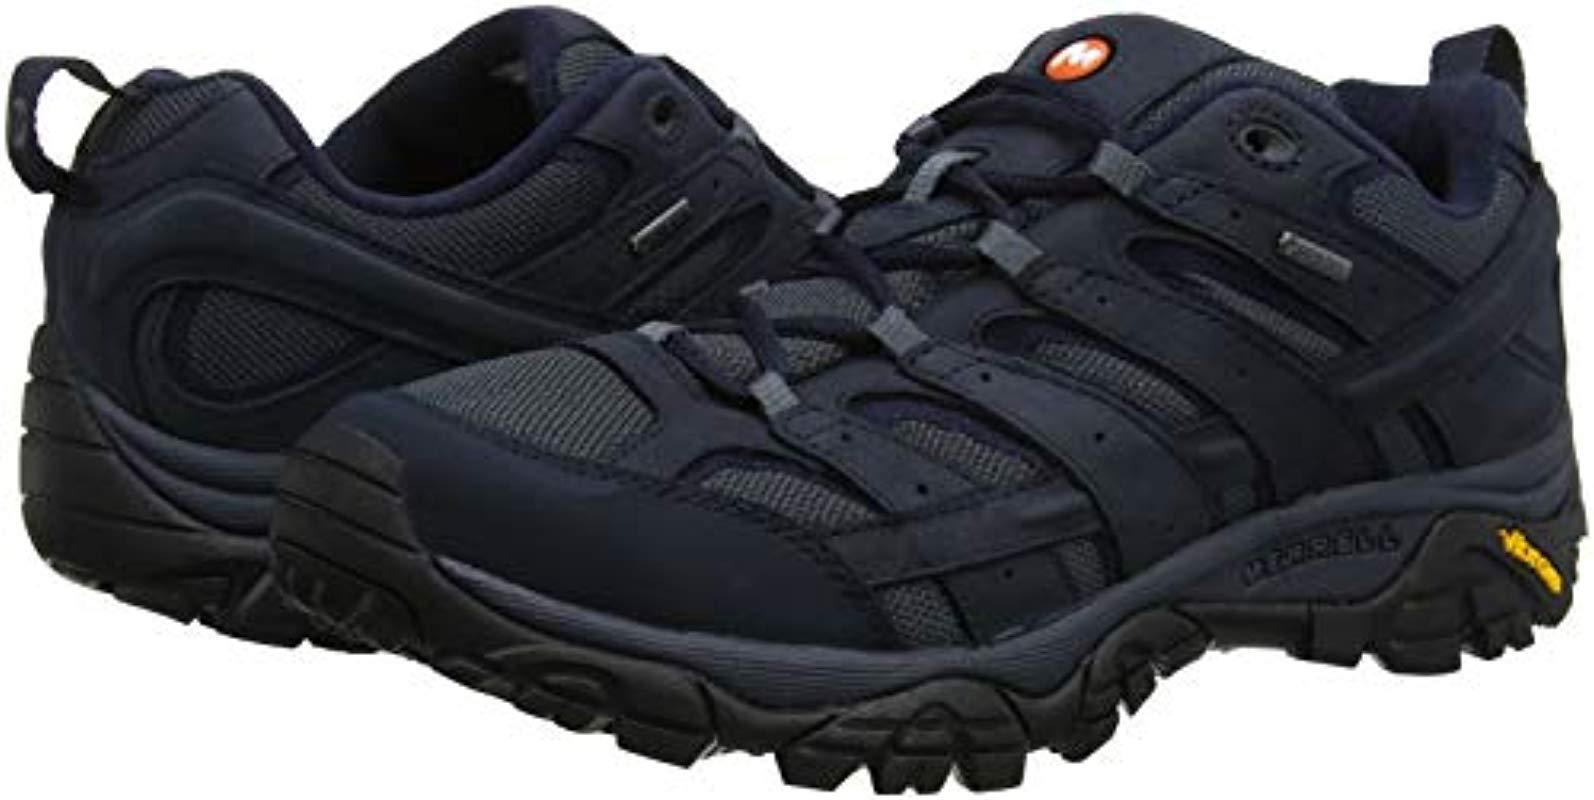 Moab 2 Smooth Gtx Low Rise Hiking Boots 